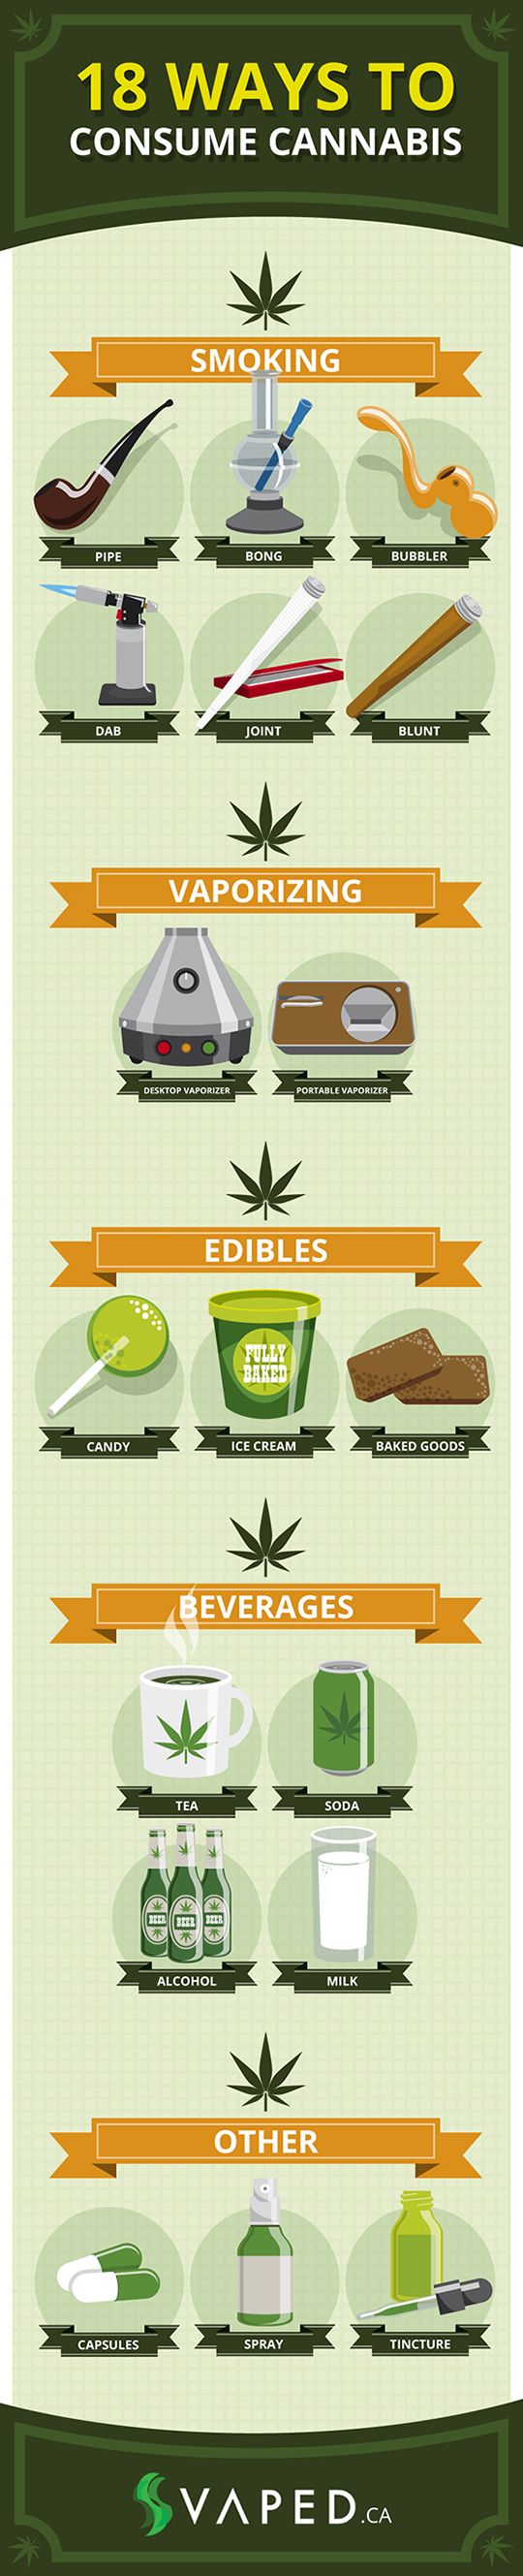 18 Ways to Consume Cannabis [Infographic]